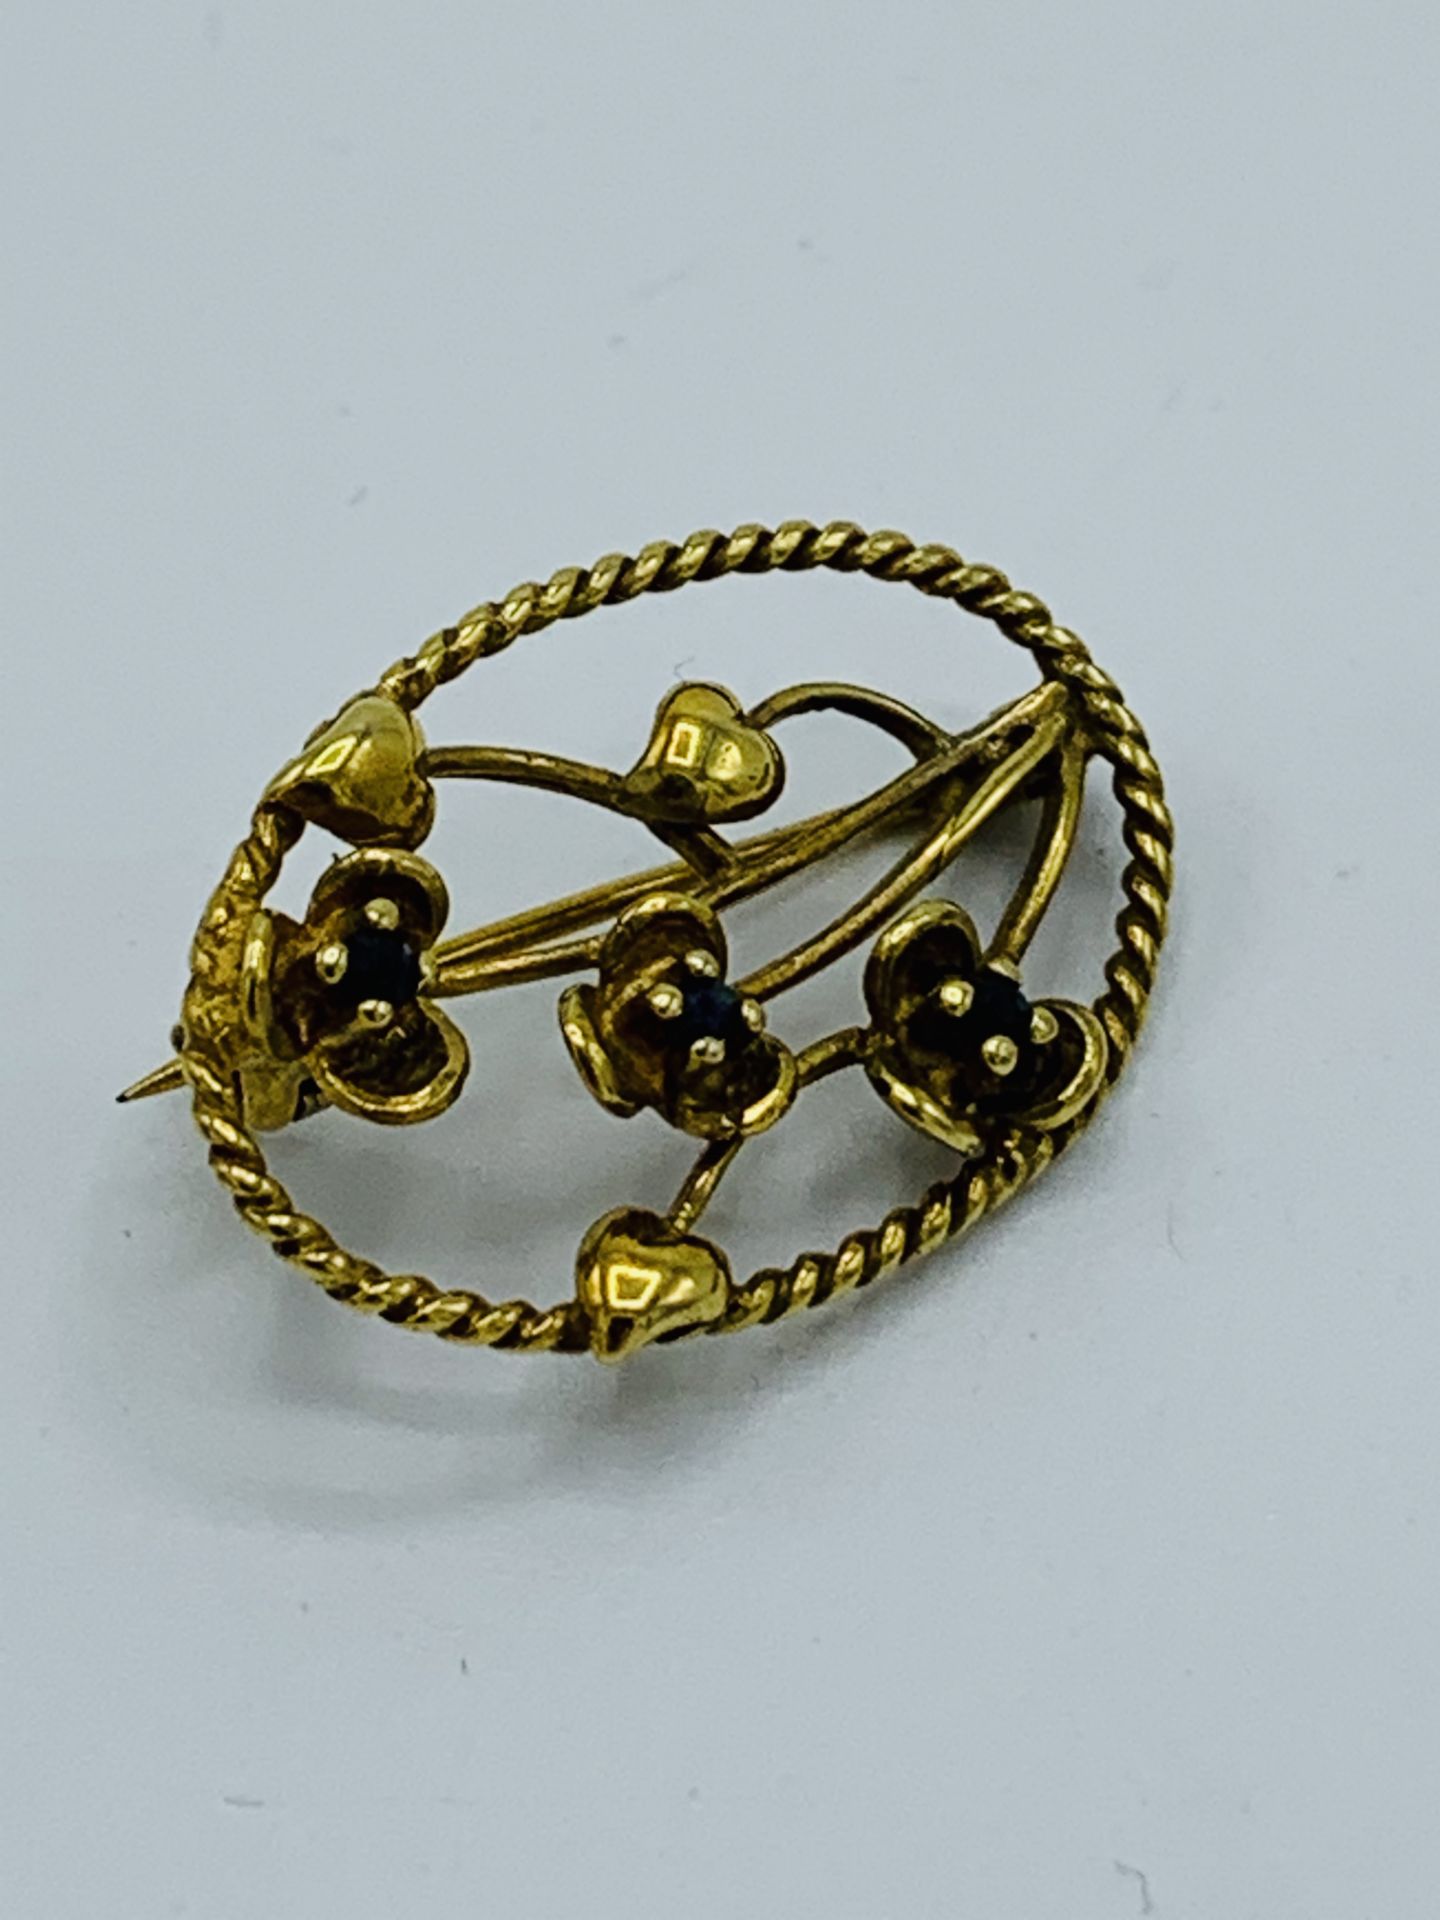 2 9ct gold antique brooches. - Image 2 of 3